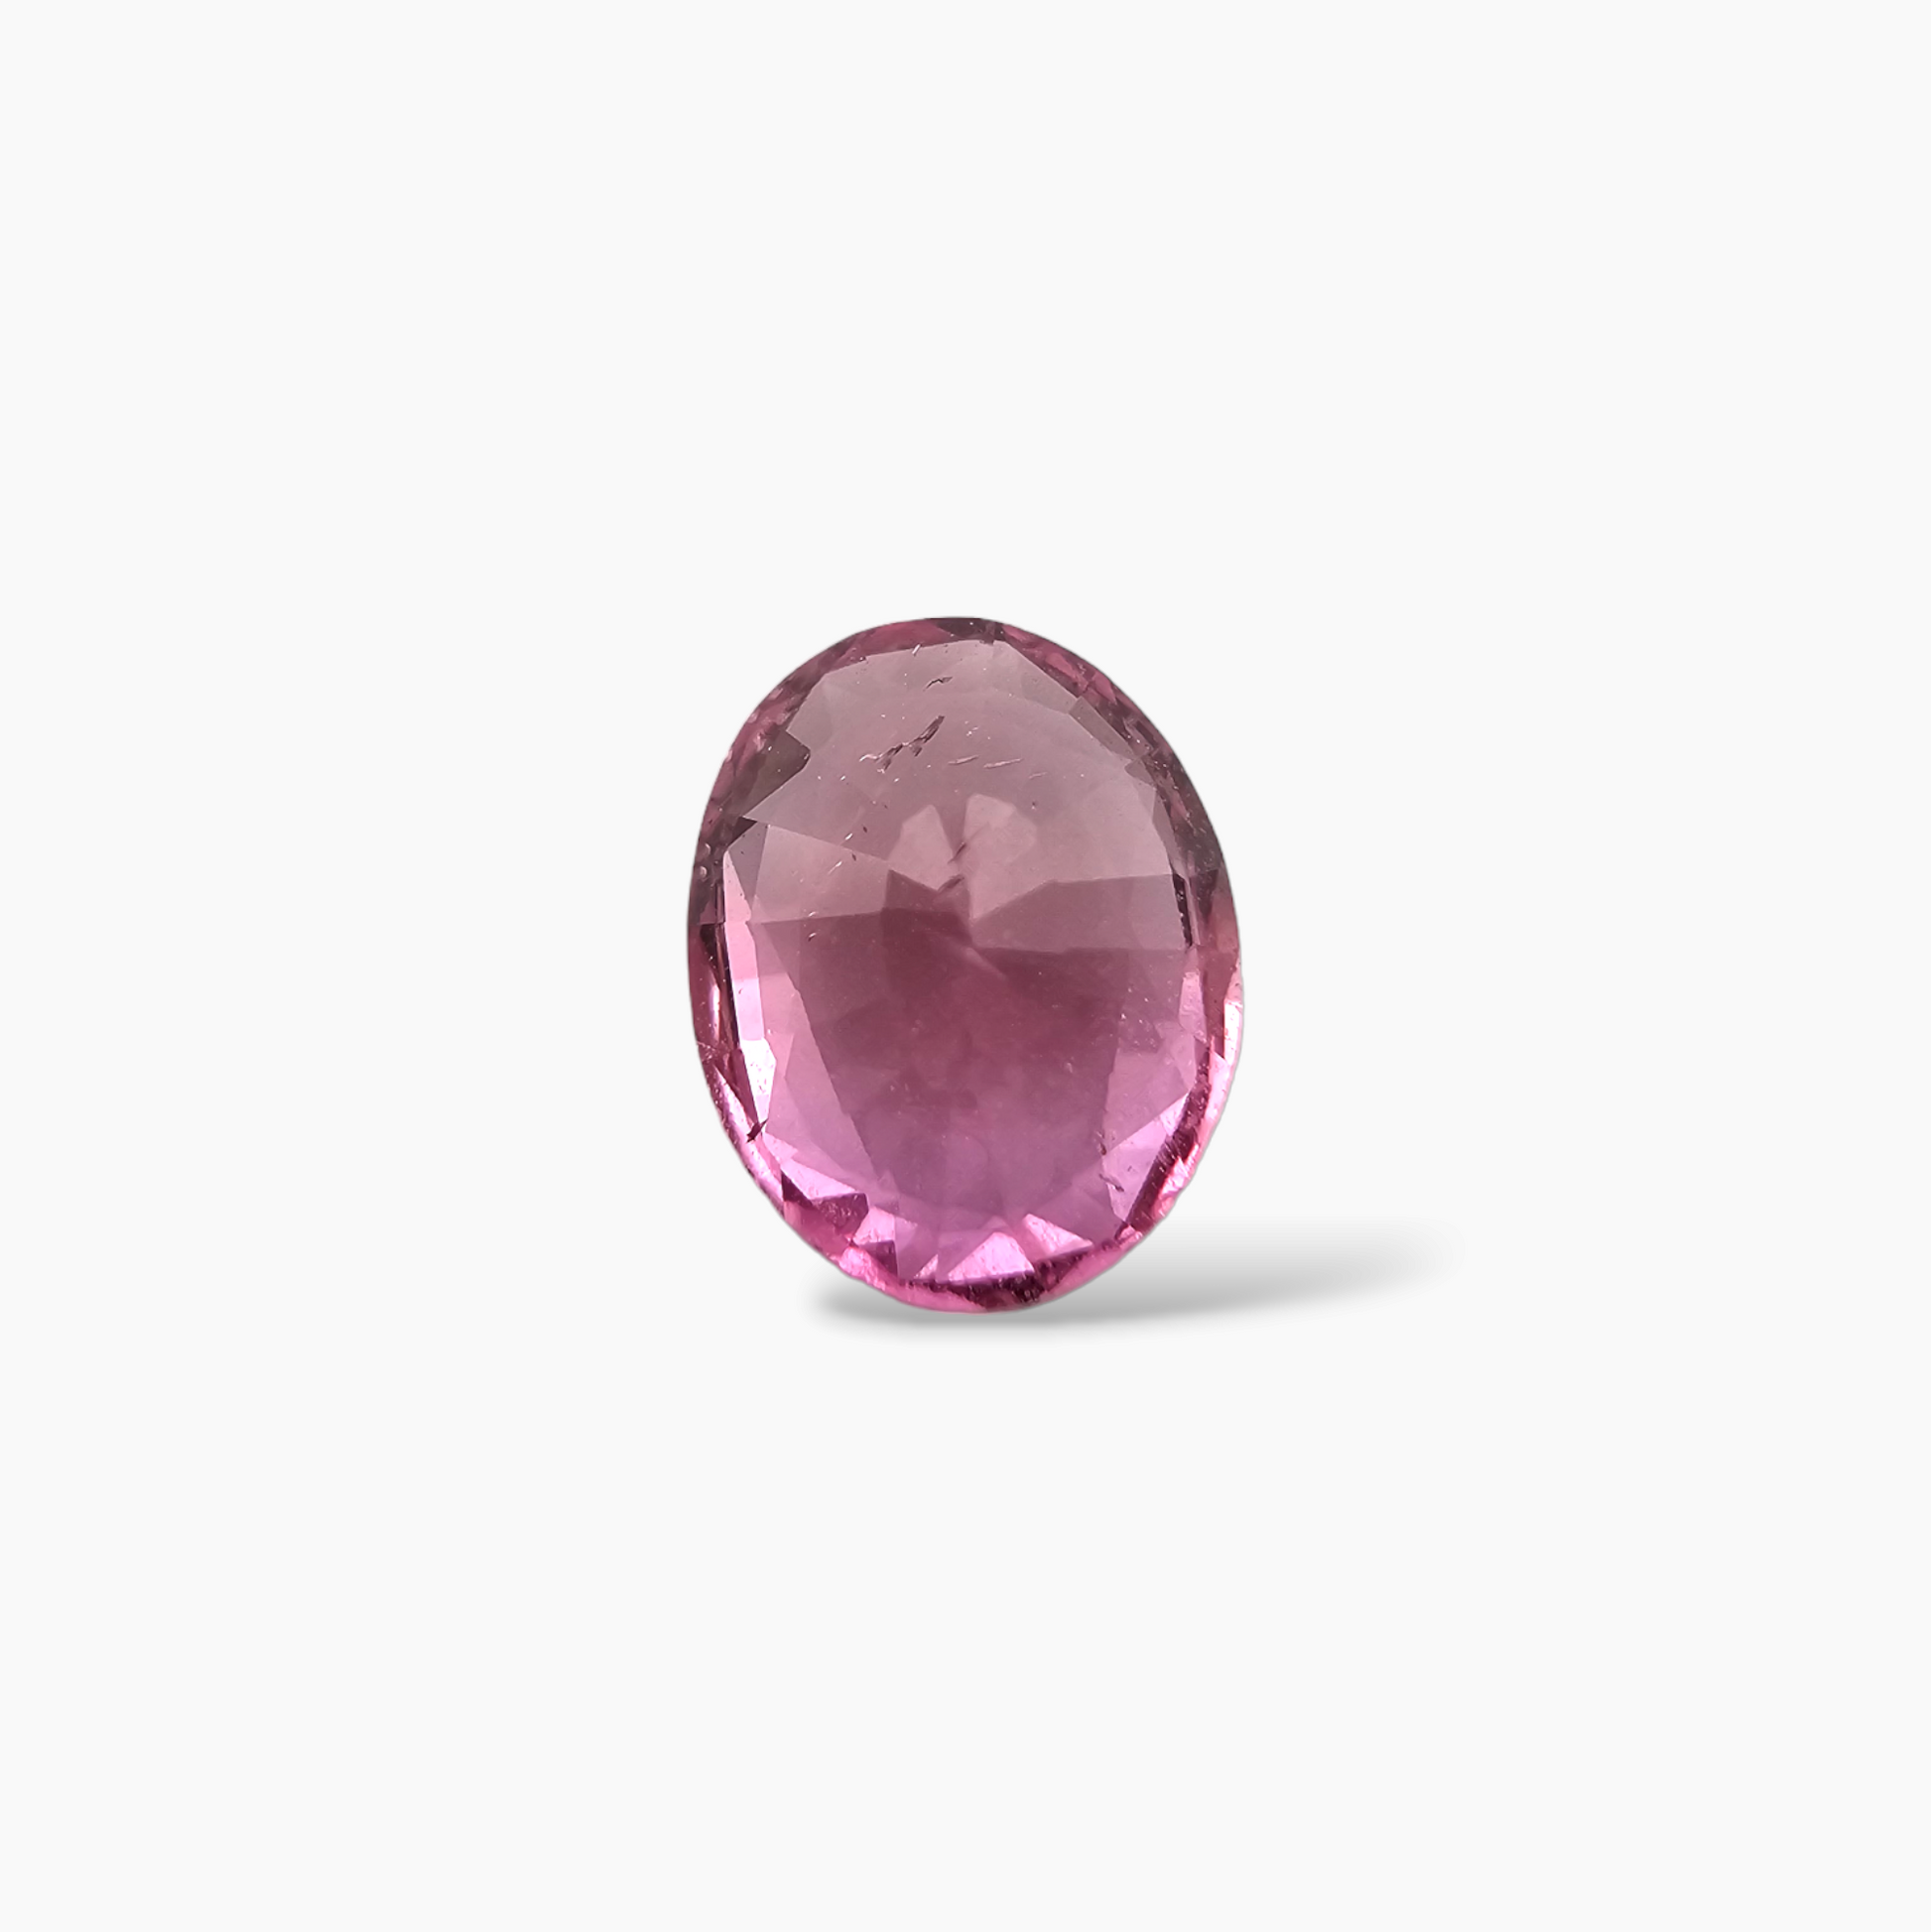 loose Pink Sapphire Natural Stone Oval Cut 1.28 Carats